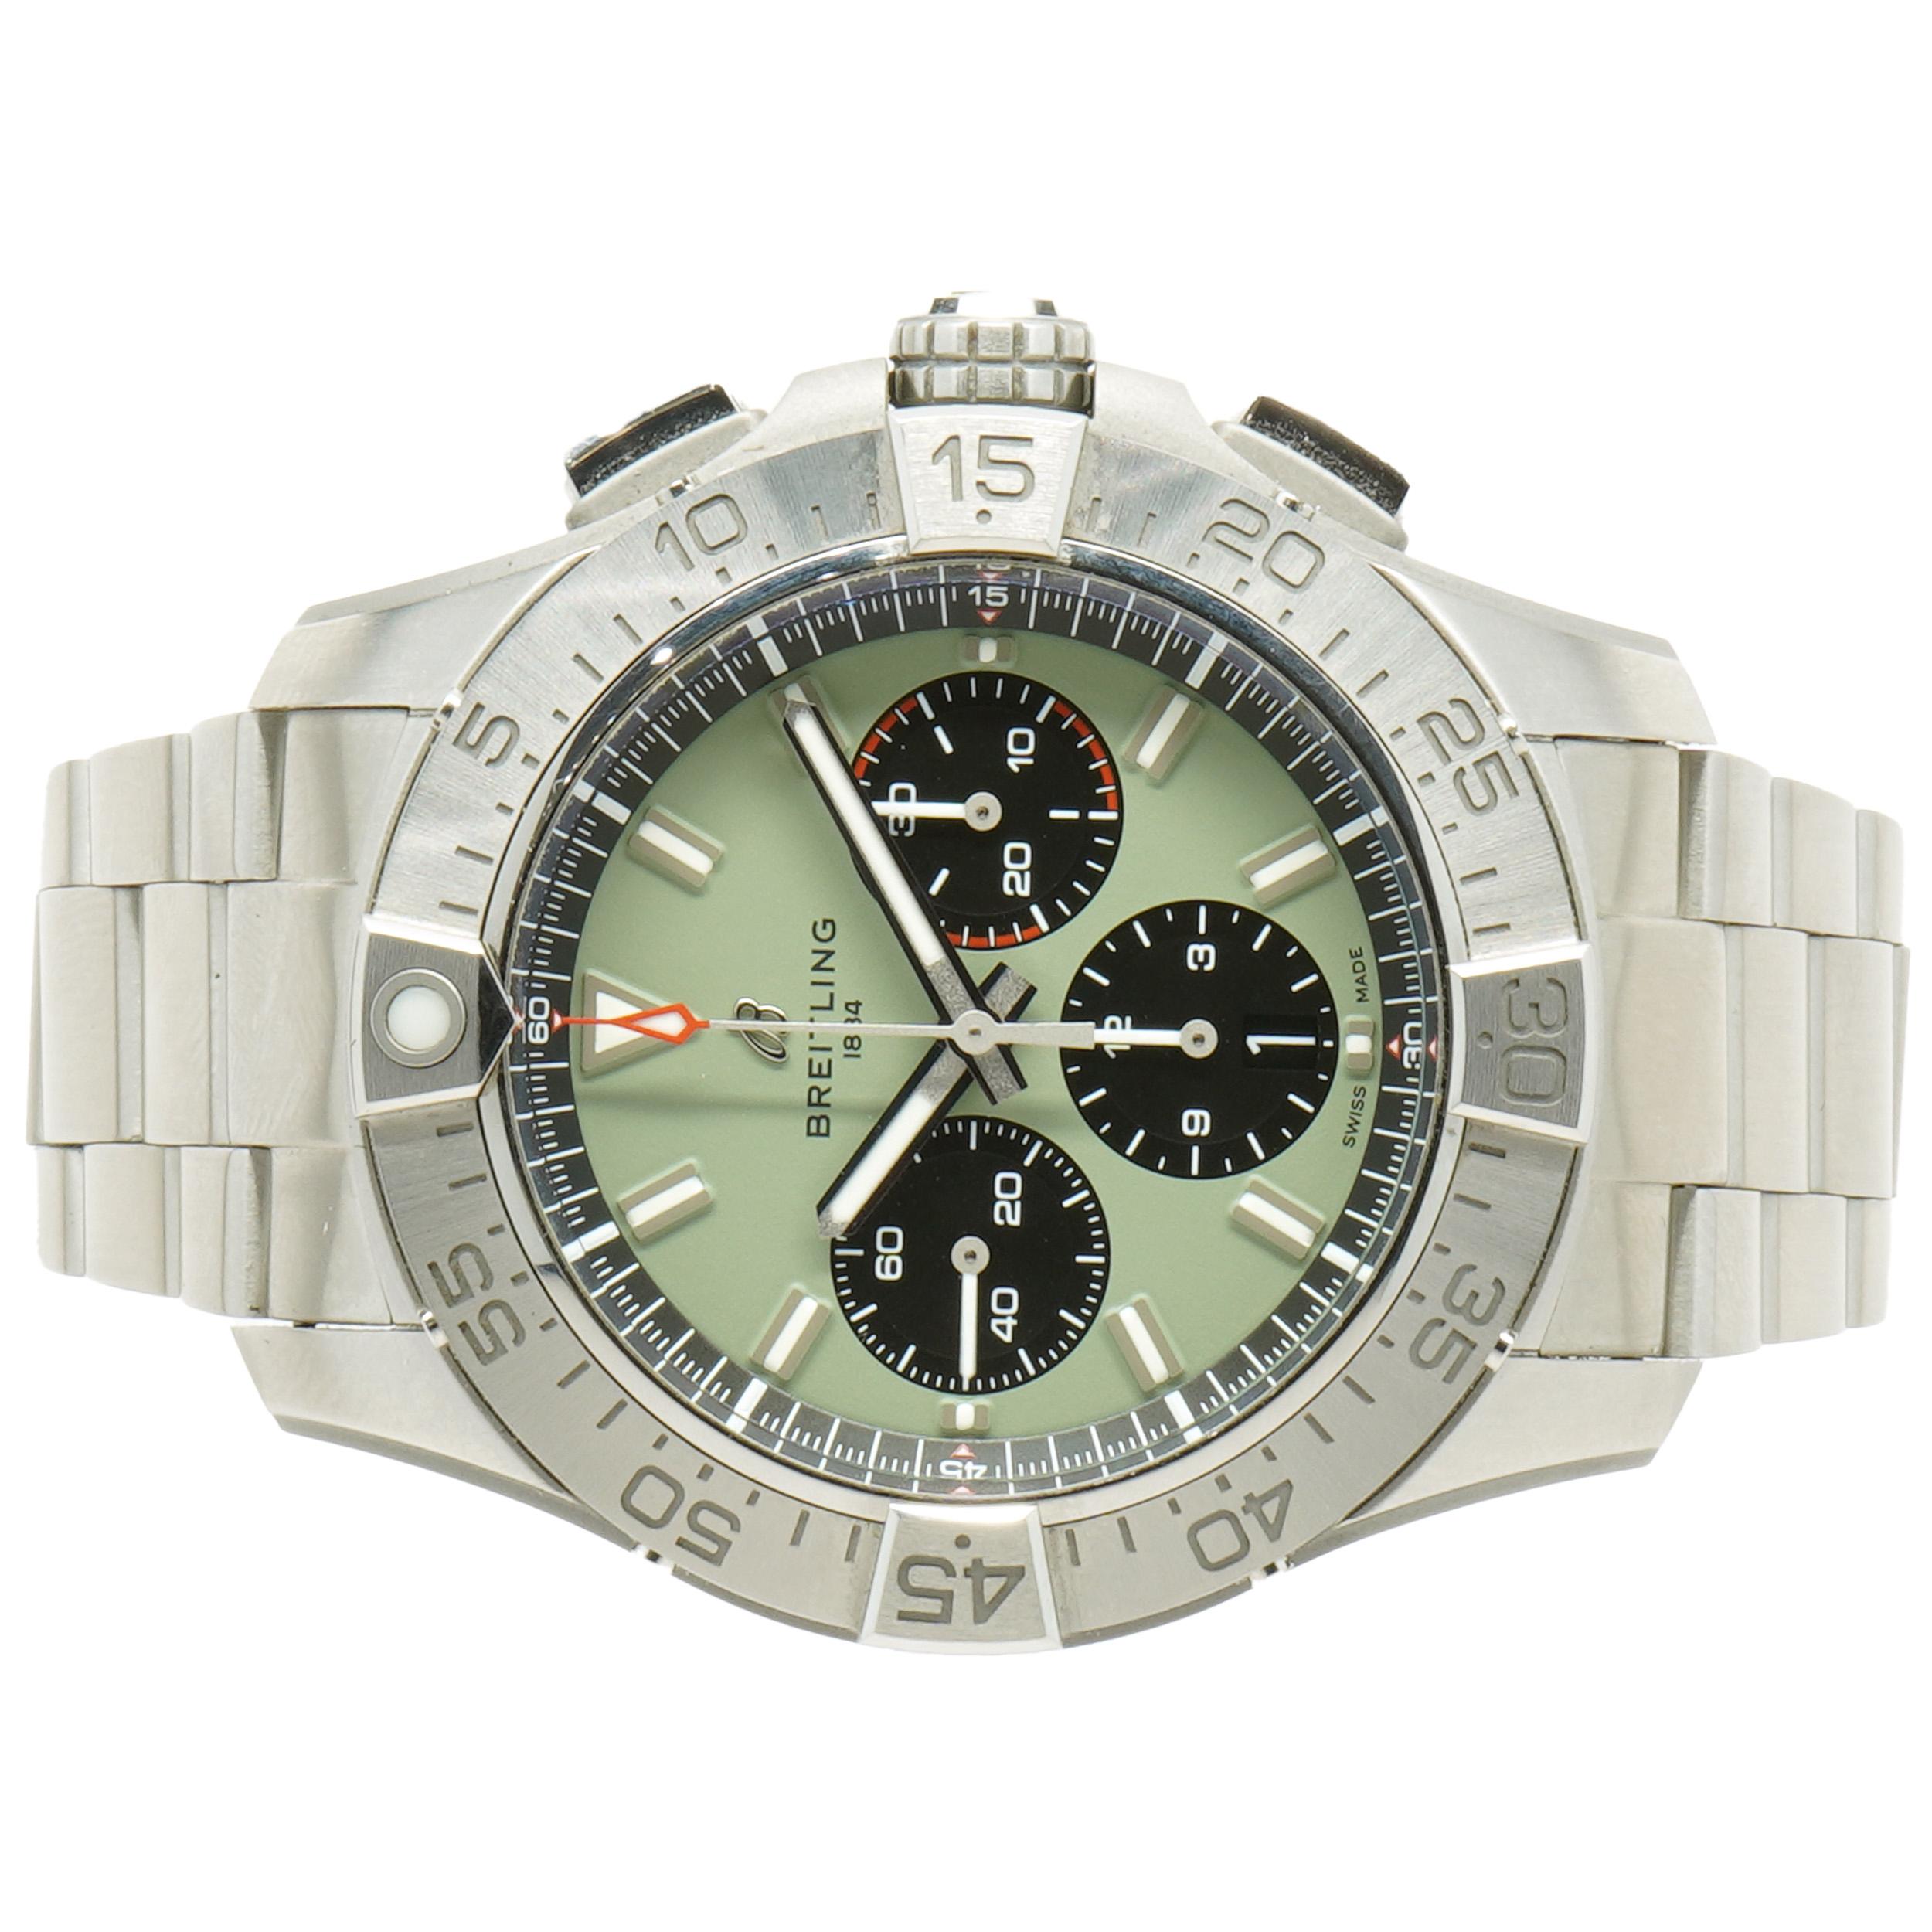 Designer: Breitling
Movement: automatic
Function: hours, minutes, seconds, date, chronograph, 30 minute register, 12 hour register
Case: 44mm stainless steel round, stainless steel 60-minute timing bezel
Dial: green stick, chronograph,